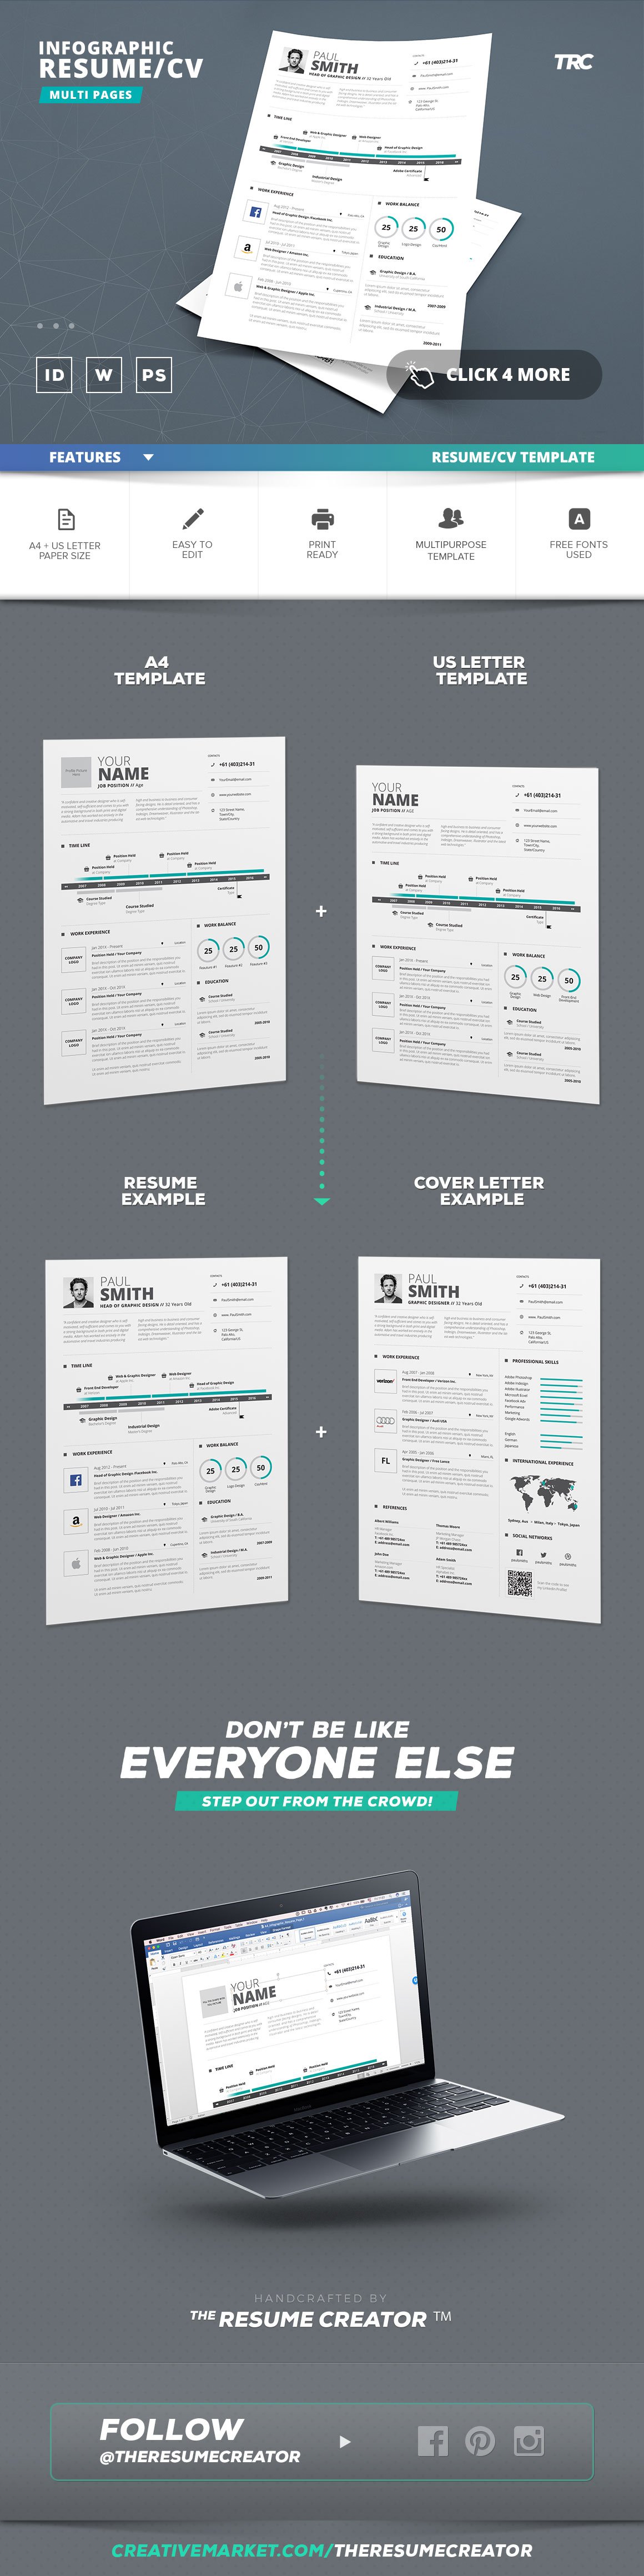 Infographic Resume/Cv Template Vol.5 preview image.